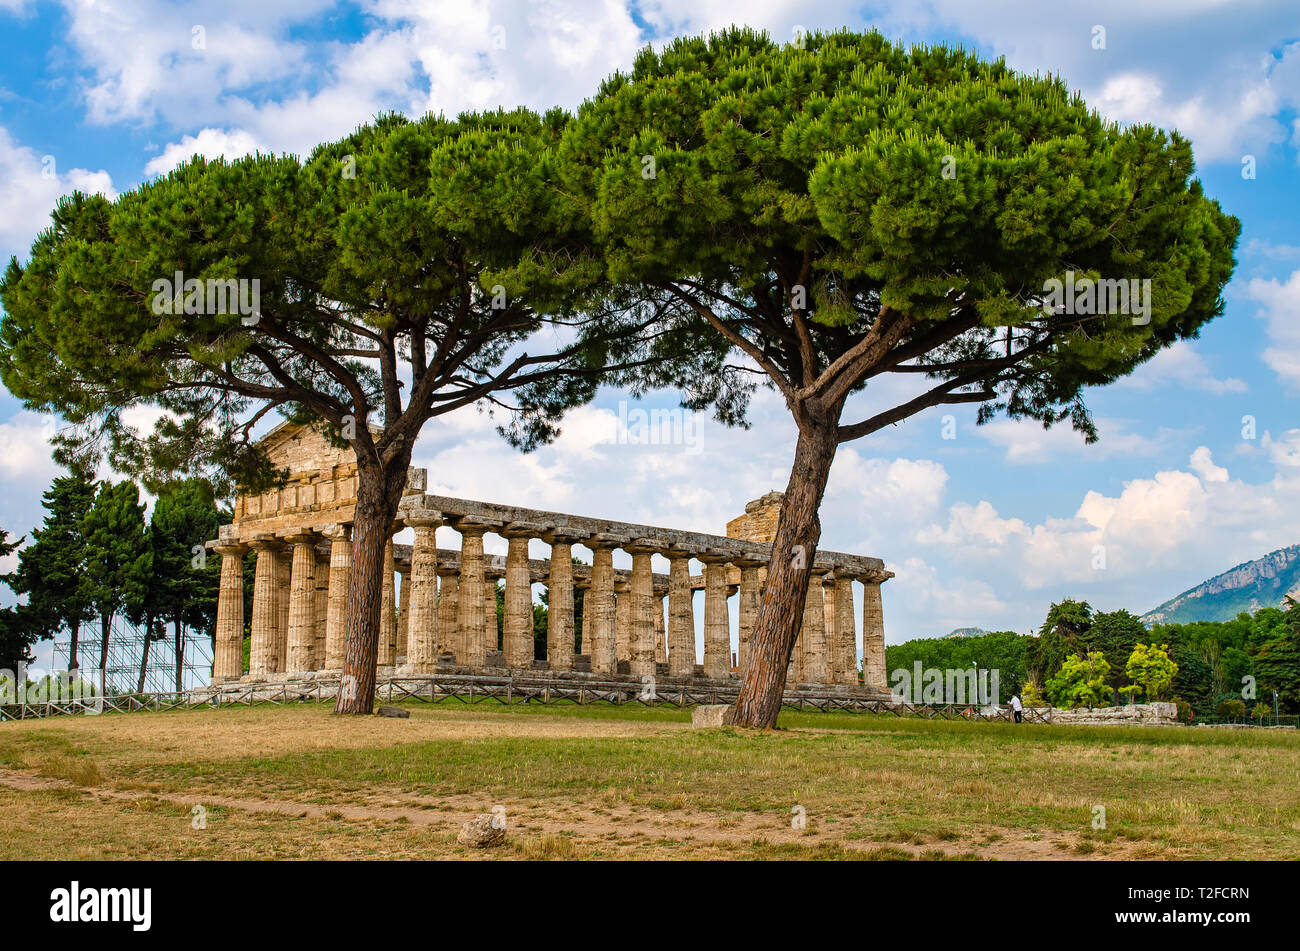 Temple of Athena at Paestum was an ancient Greek city in Magna Graecia, southern Italy. Stock Photo